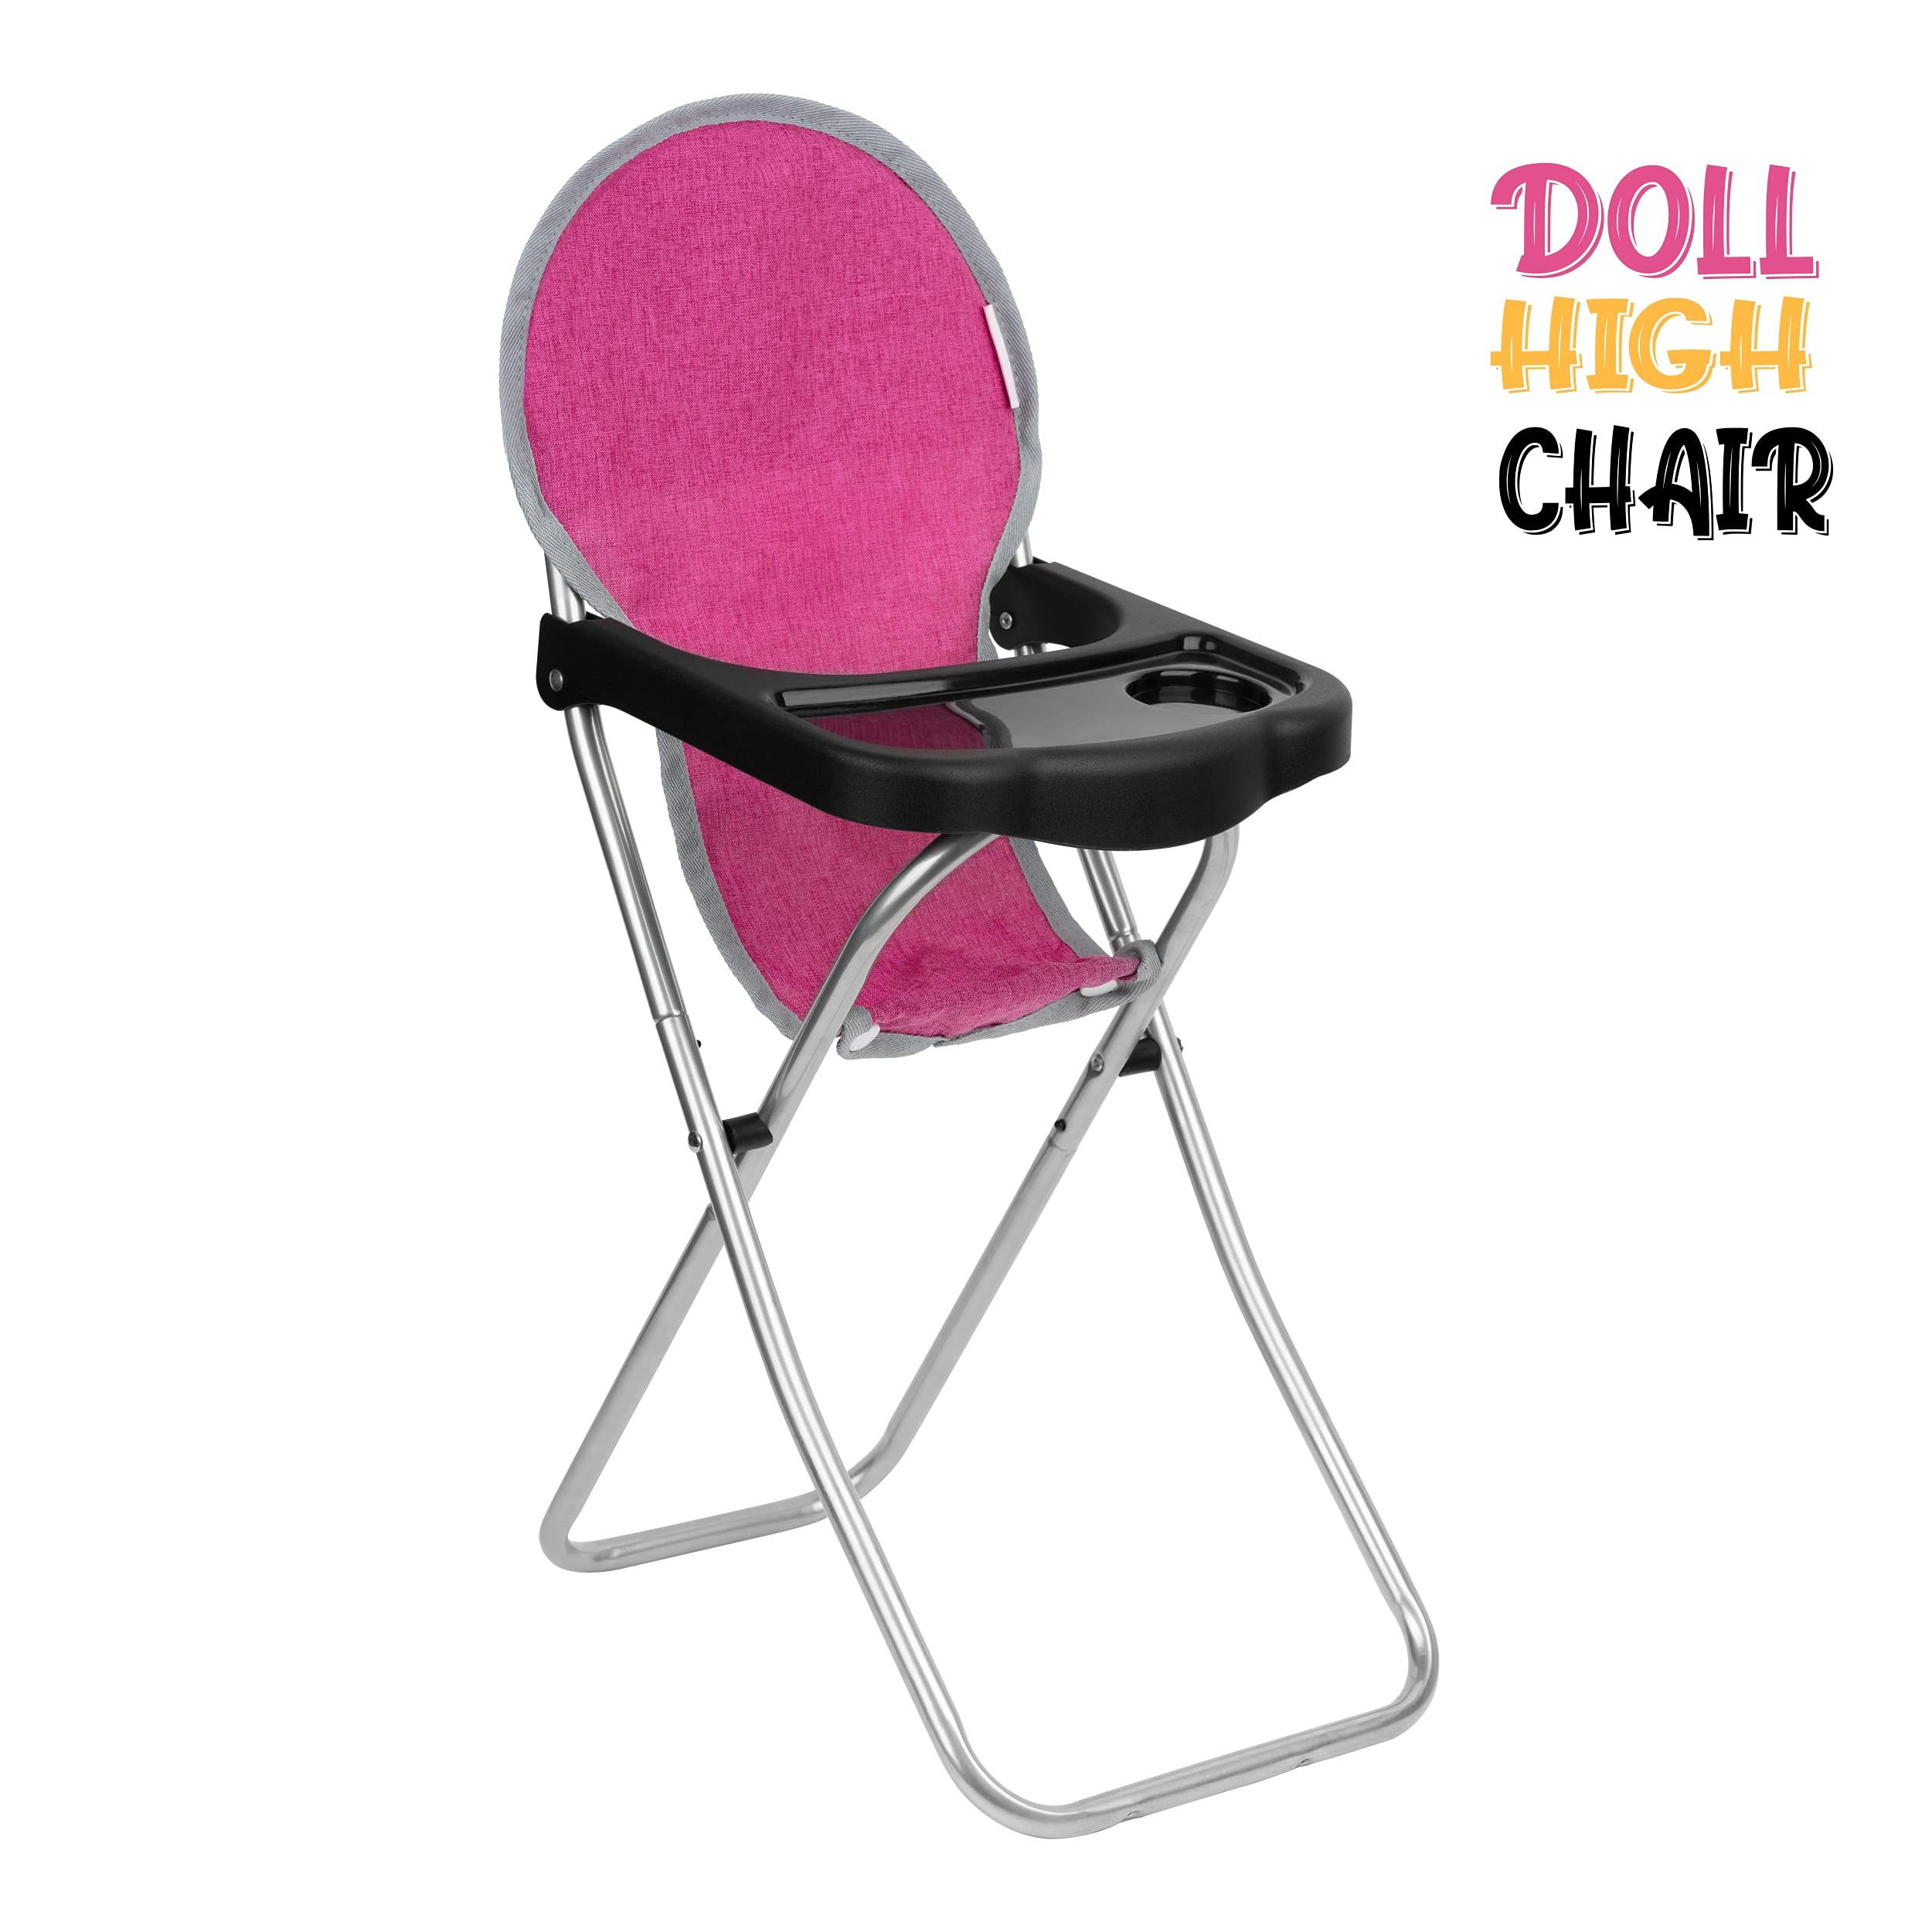 Fash N Kolor Doll Play Set Pink Denim 4 Piece Includes - Pack N Play, Doll Stroller, Doll High Chair, Infant Seat Fits Up to 18'' Doll Bag Stroller Accessories